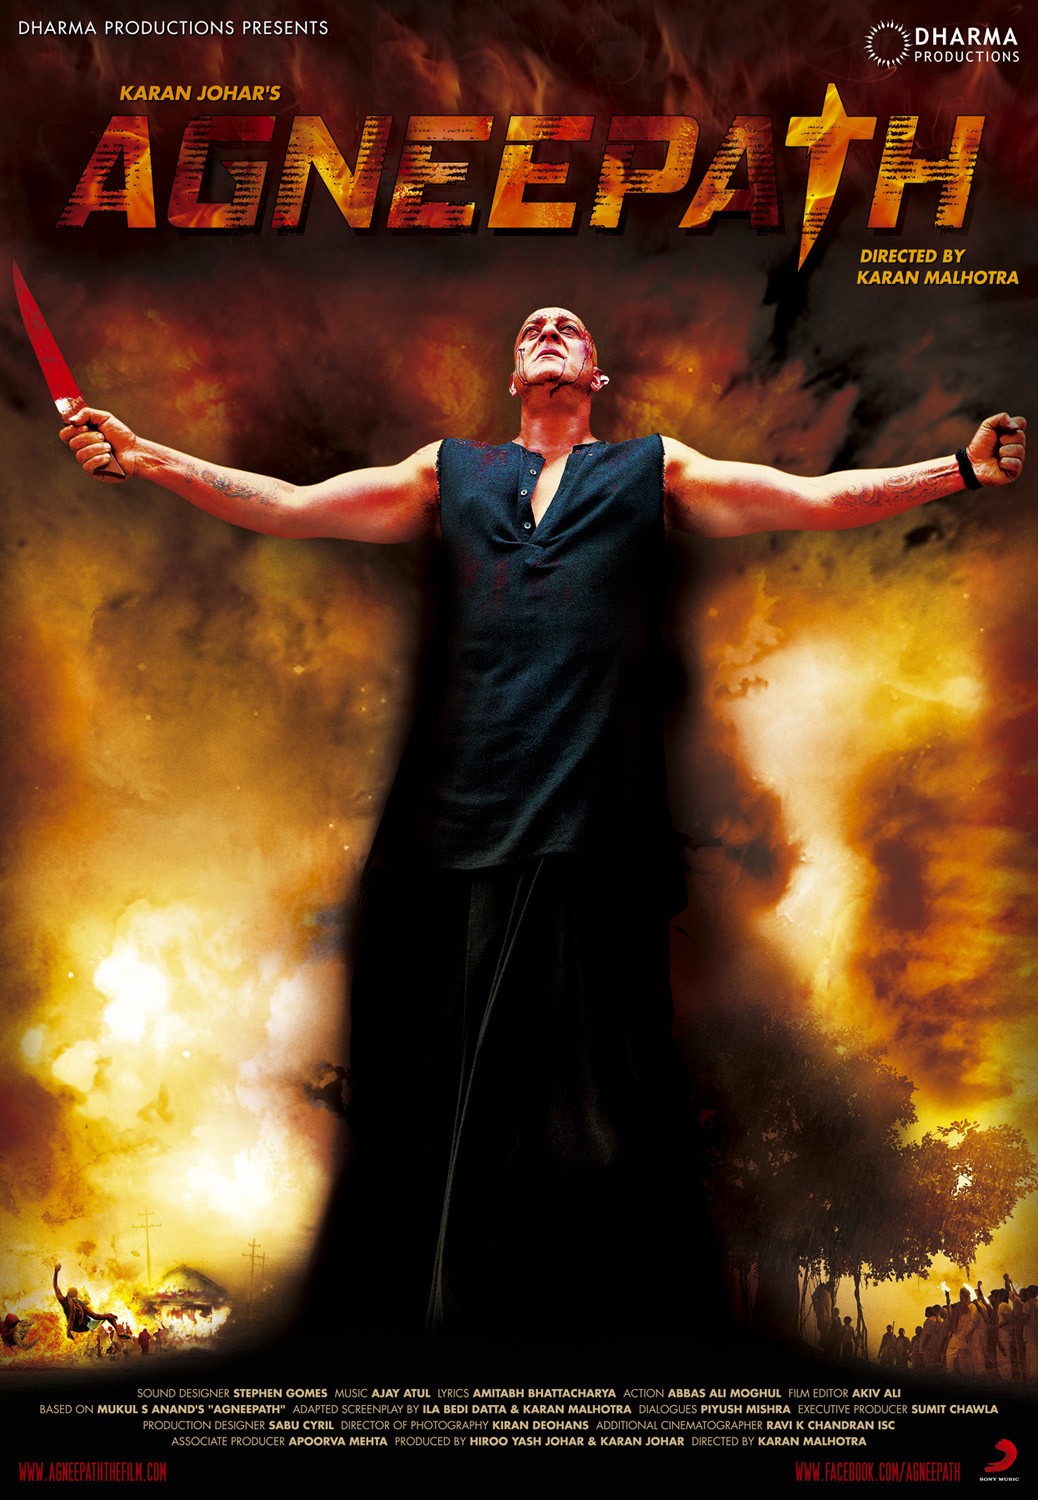 Extra Large Movie Poster Image for Agneepath (#3 of 6)